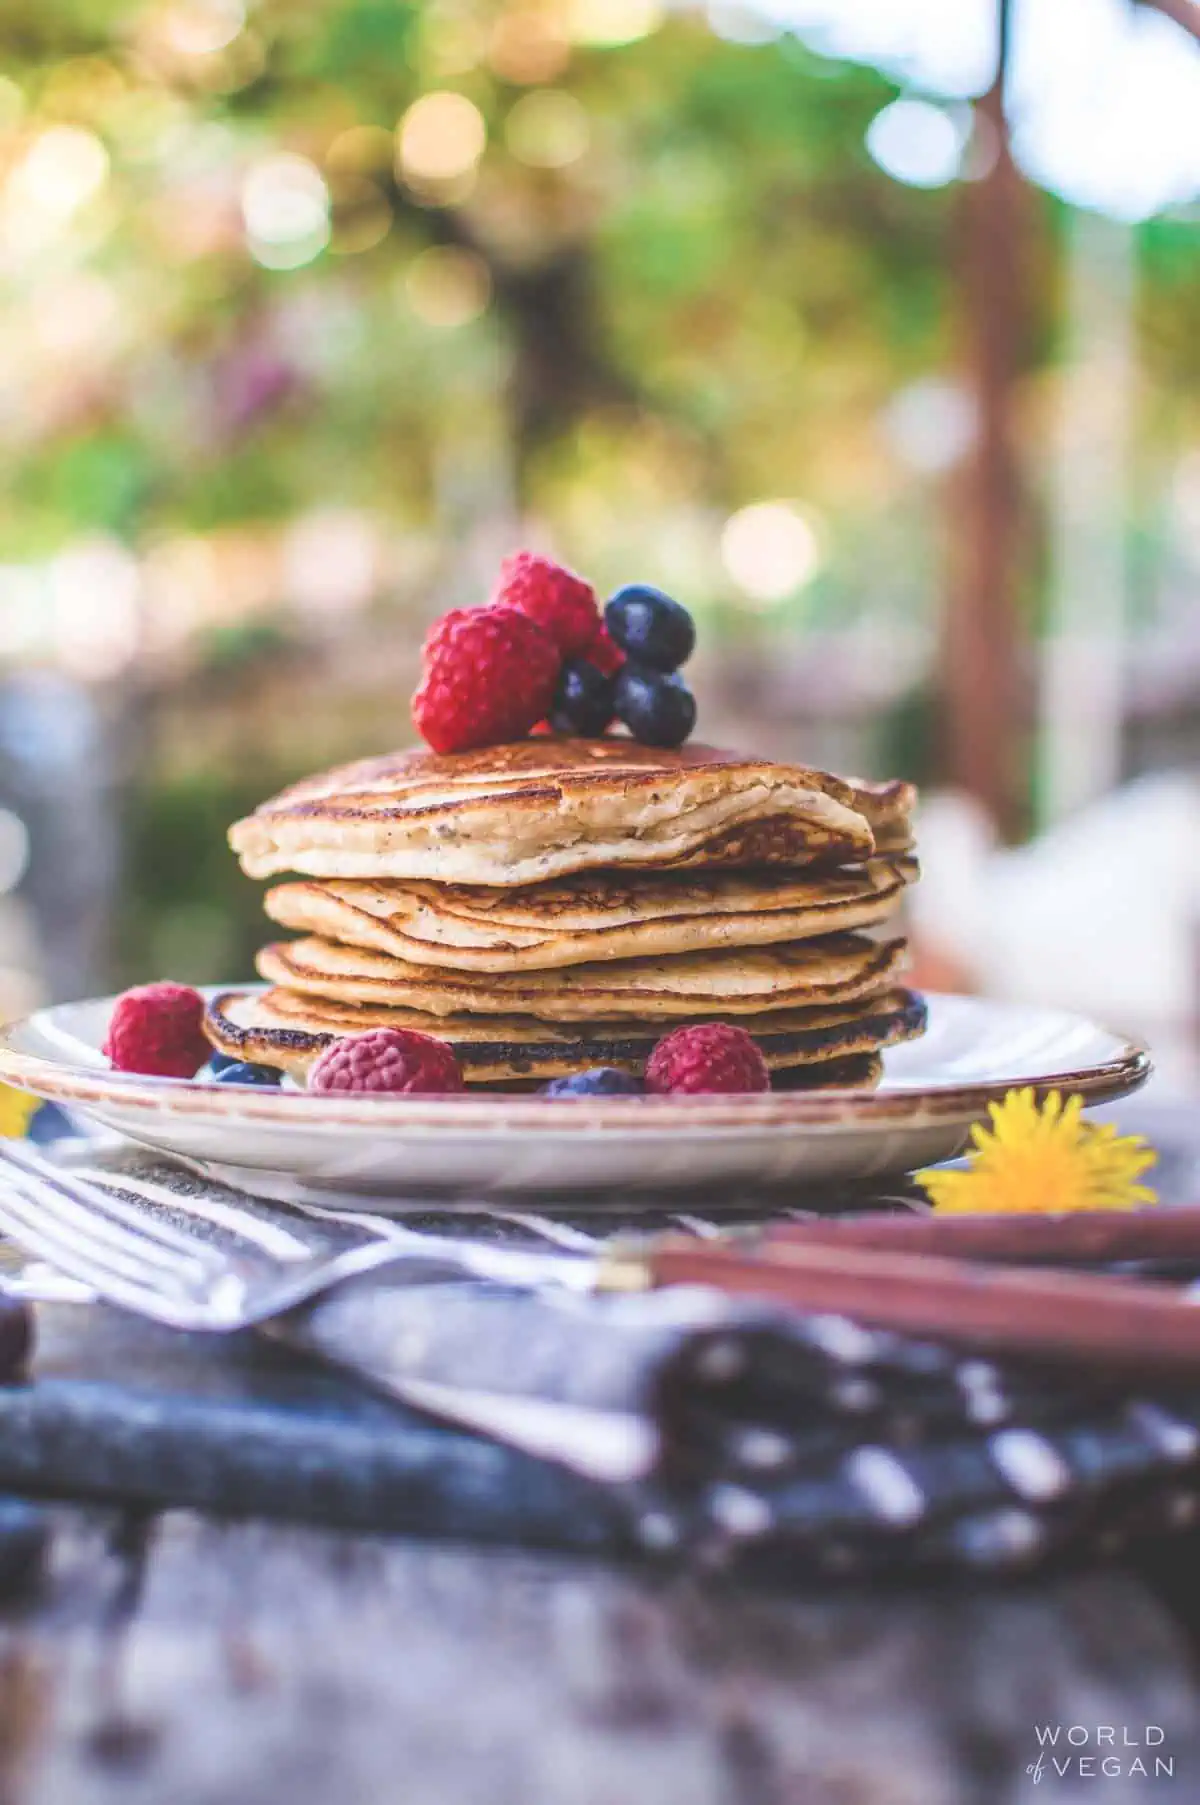 A stack of the best vegan pancakes on a plate, served with berries.